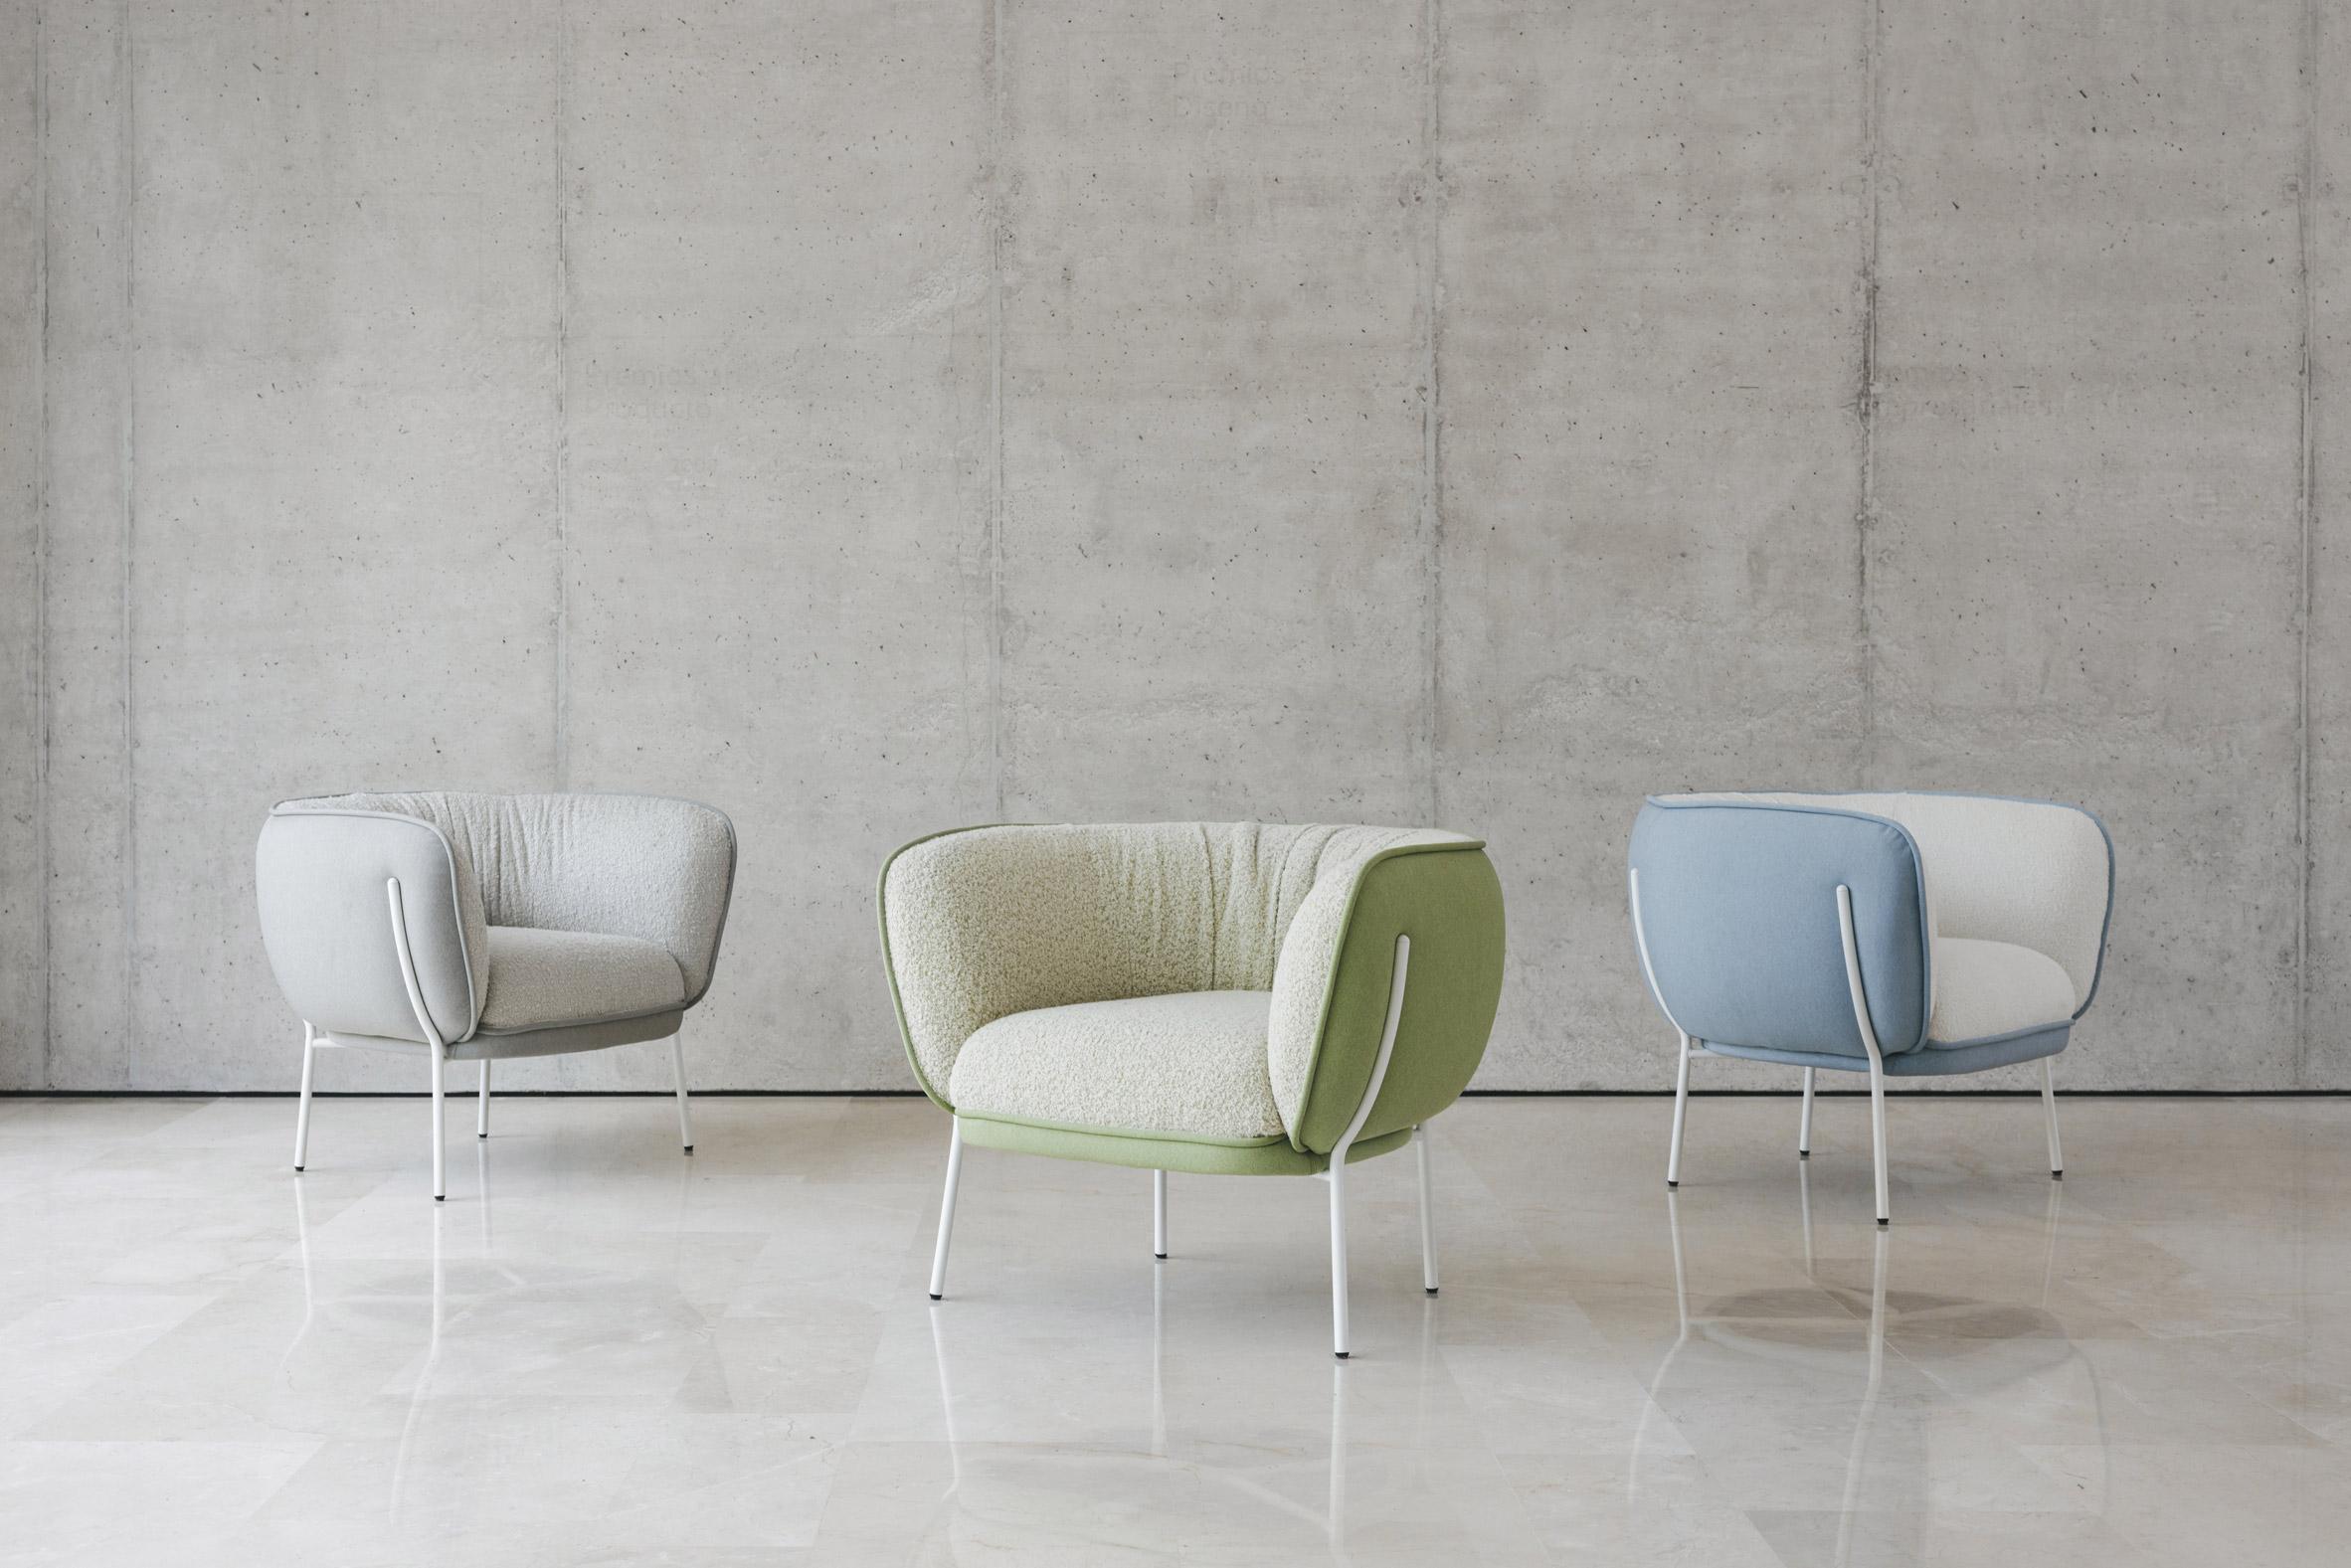 Owwi armchairs by Actiu